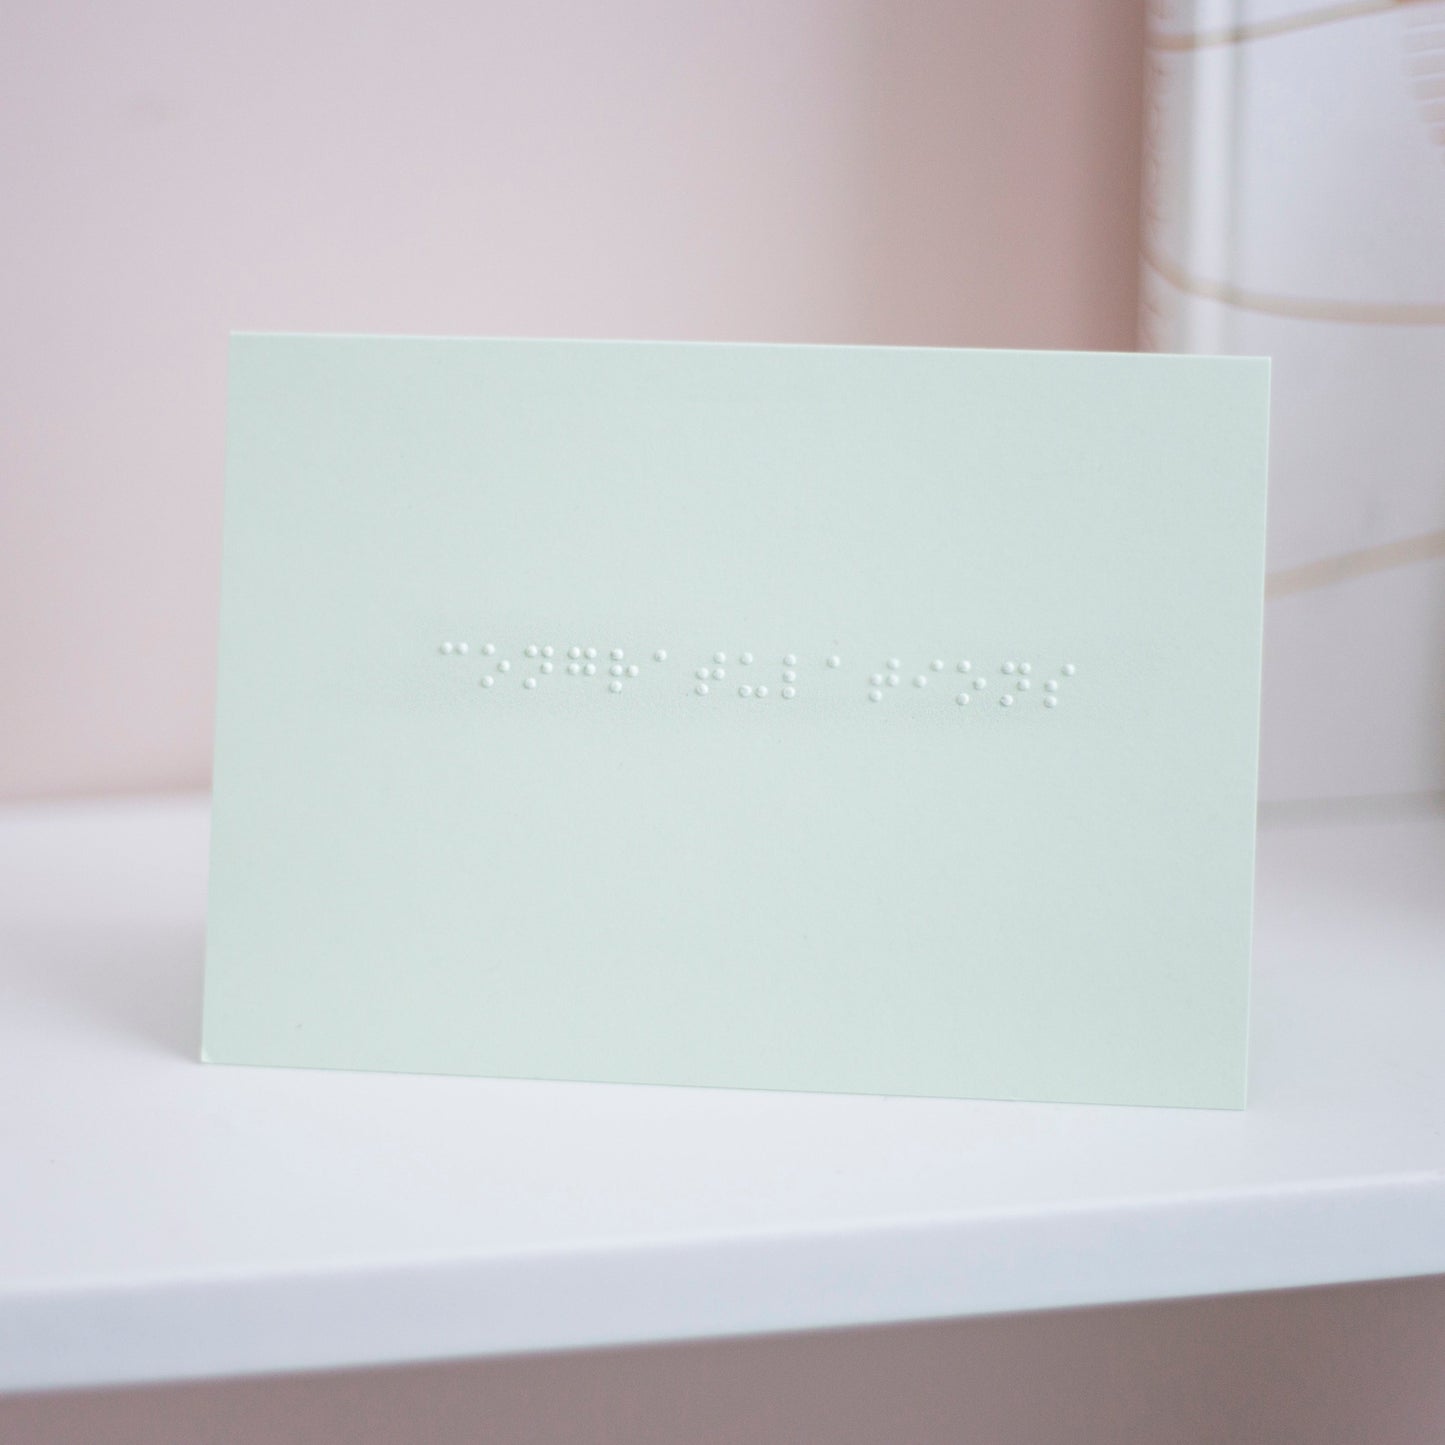 A pastel green card with congratulations written in lower case braille.